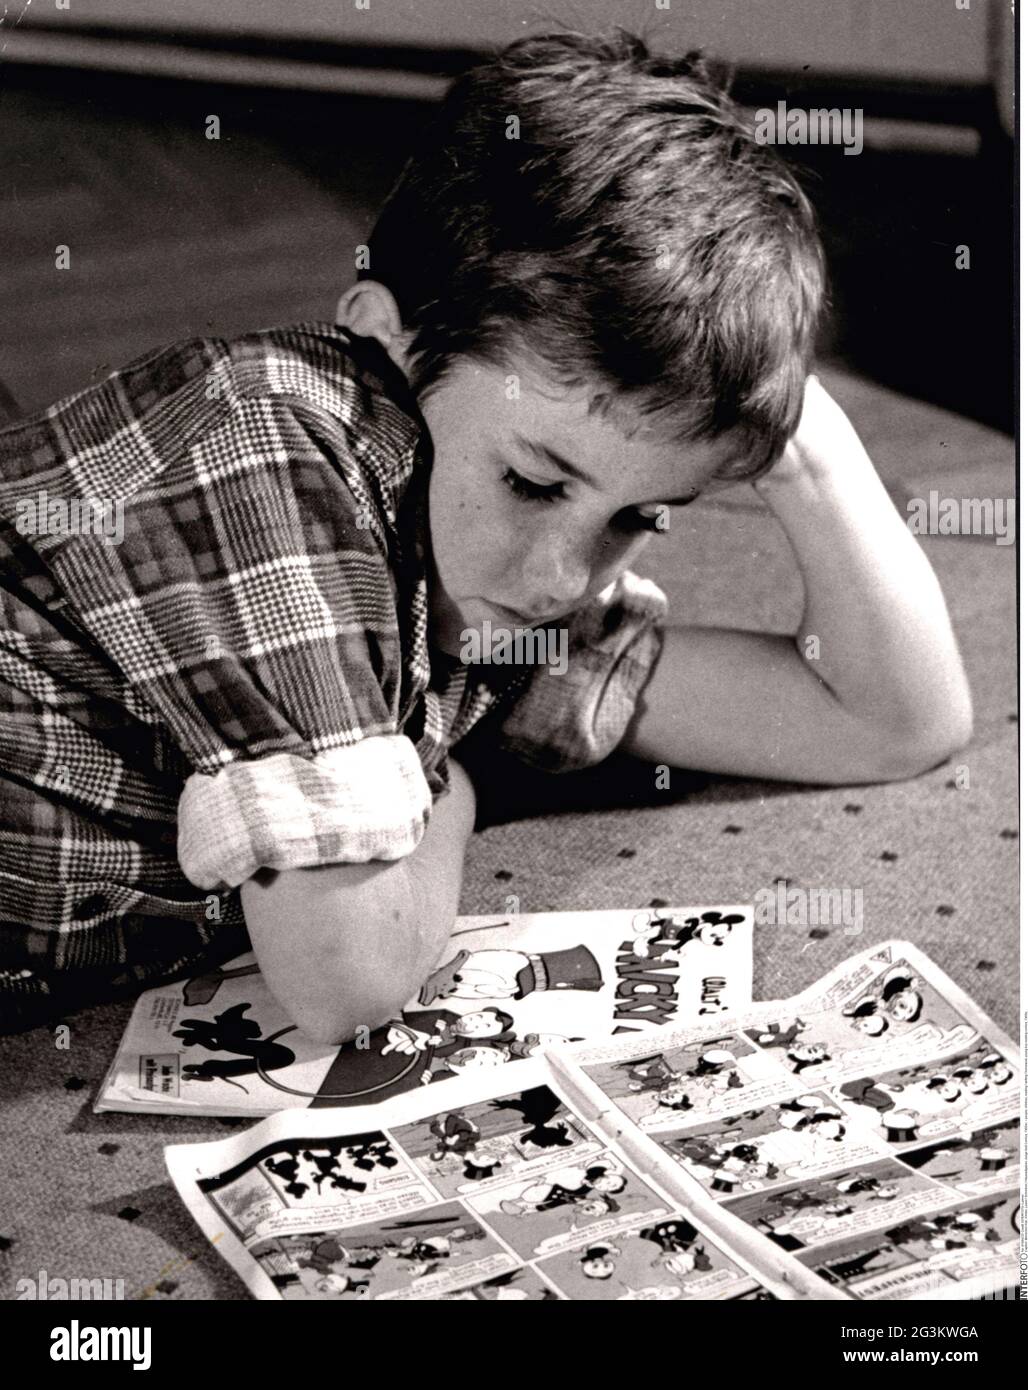 people, children, reading / writing / homework, young boy reading comics, 1960s, ADDITIONAL-RIGHTS-CLEARANCE-INFO-NOT-AVAILABLE Stock Photo